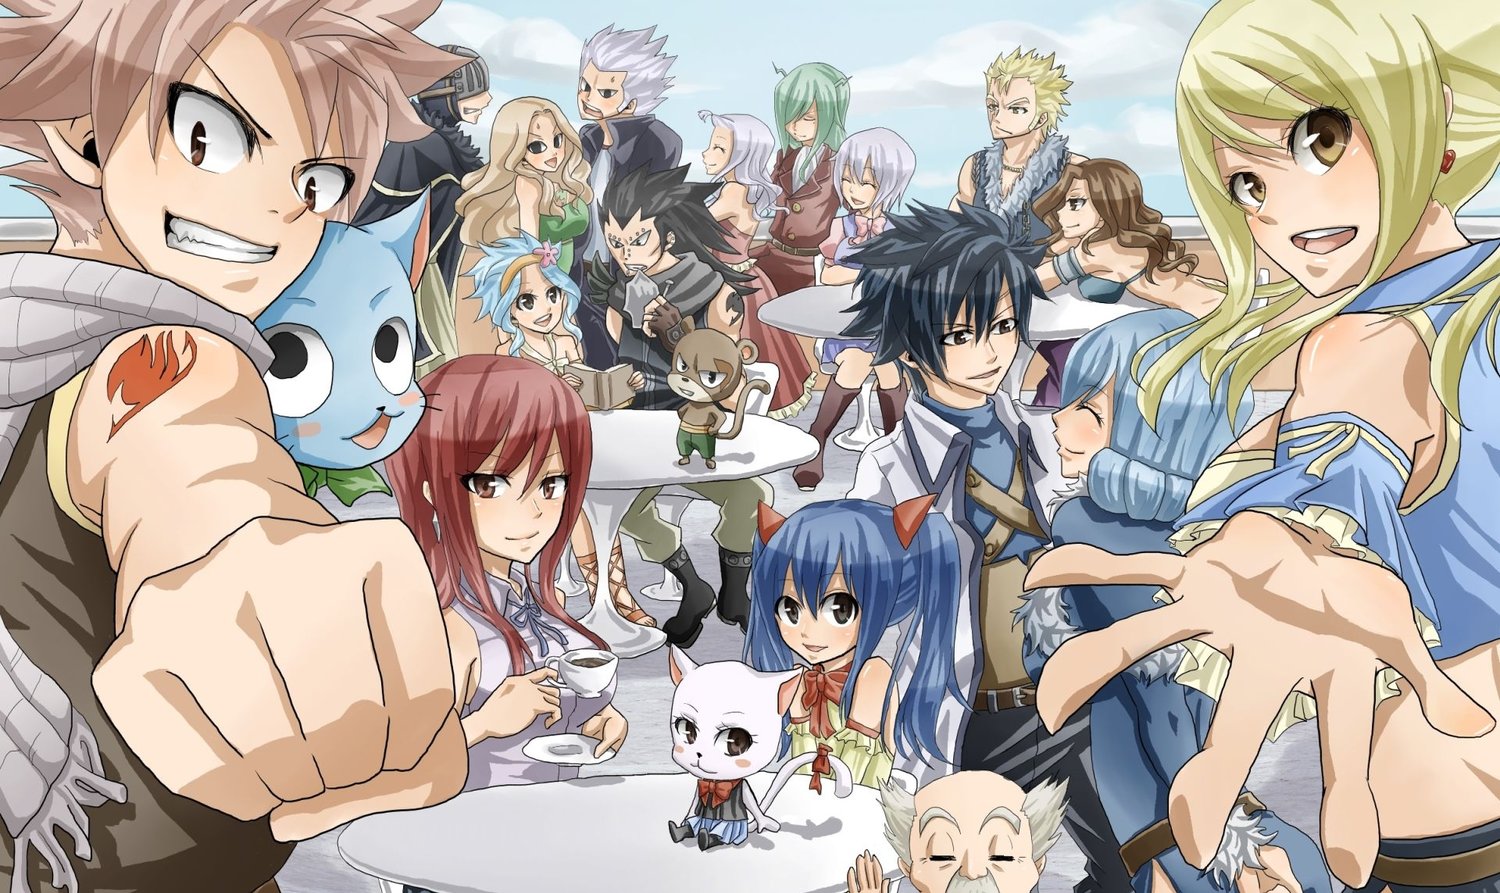 Fairy Tail Wiki on X: Second filler character for the upcoming arc! Drawn  by Hiro himself~ #FairyTail #Anime  / X